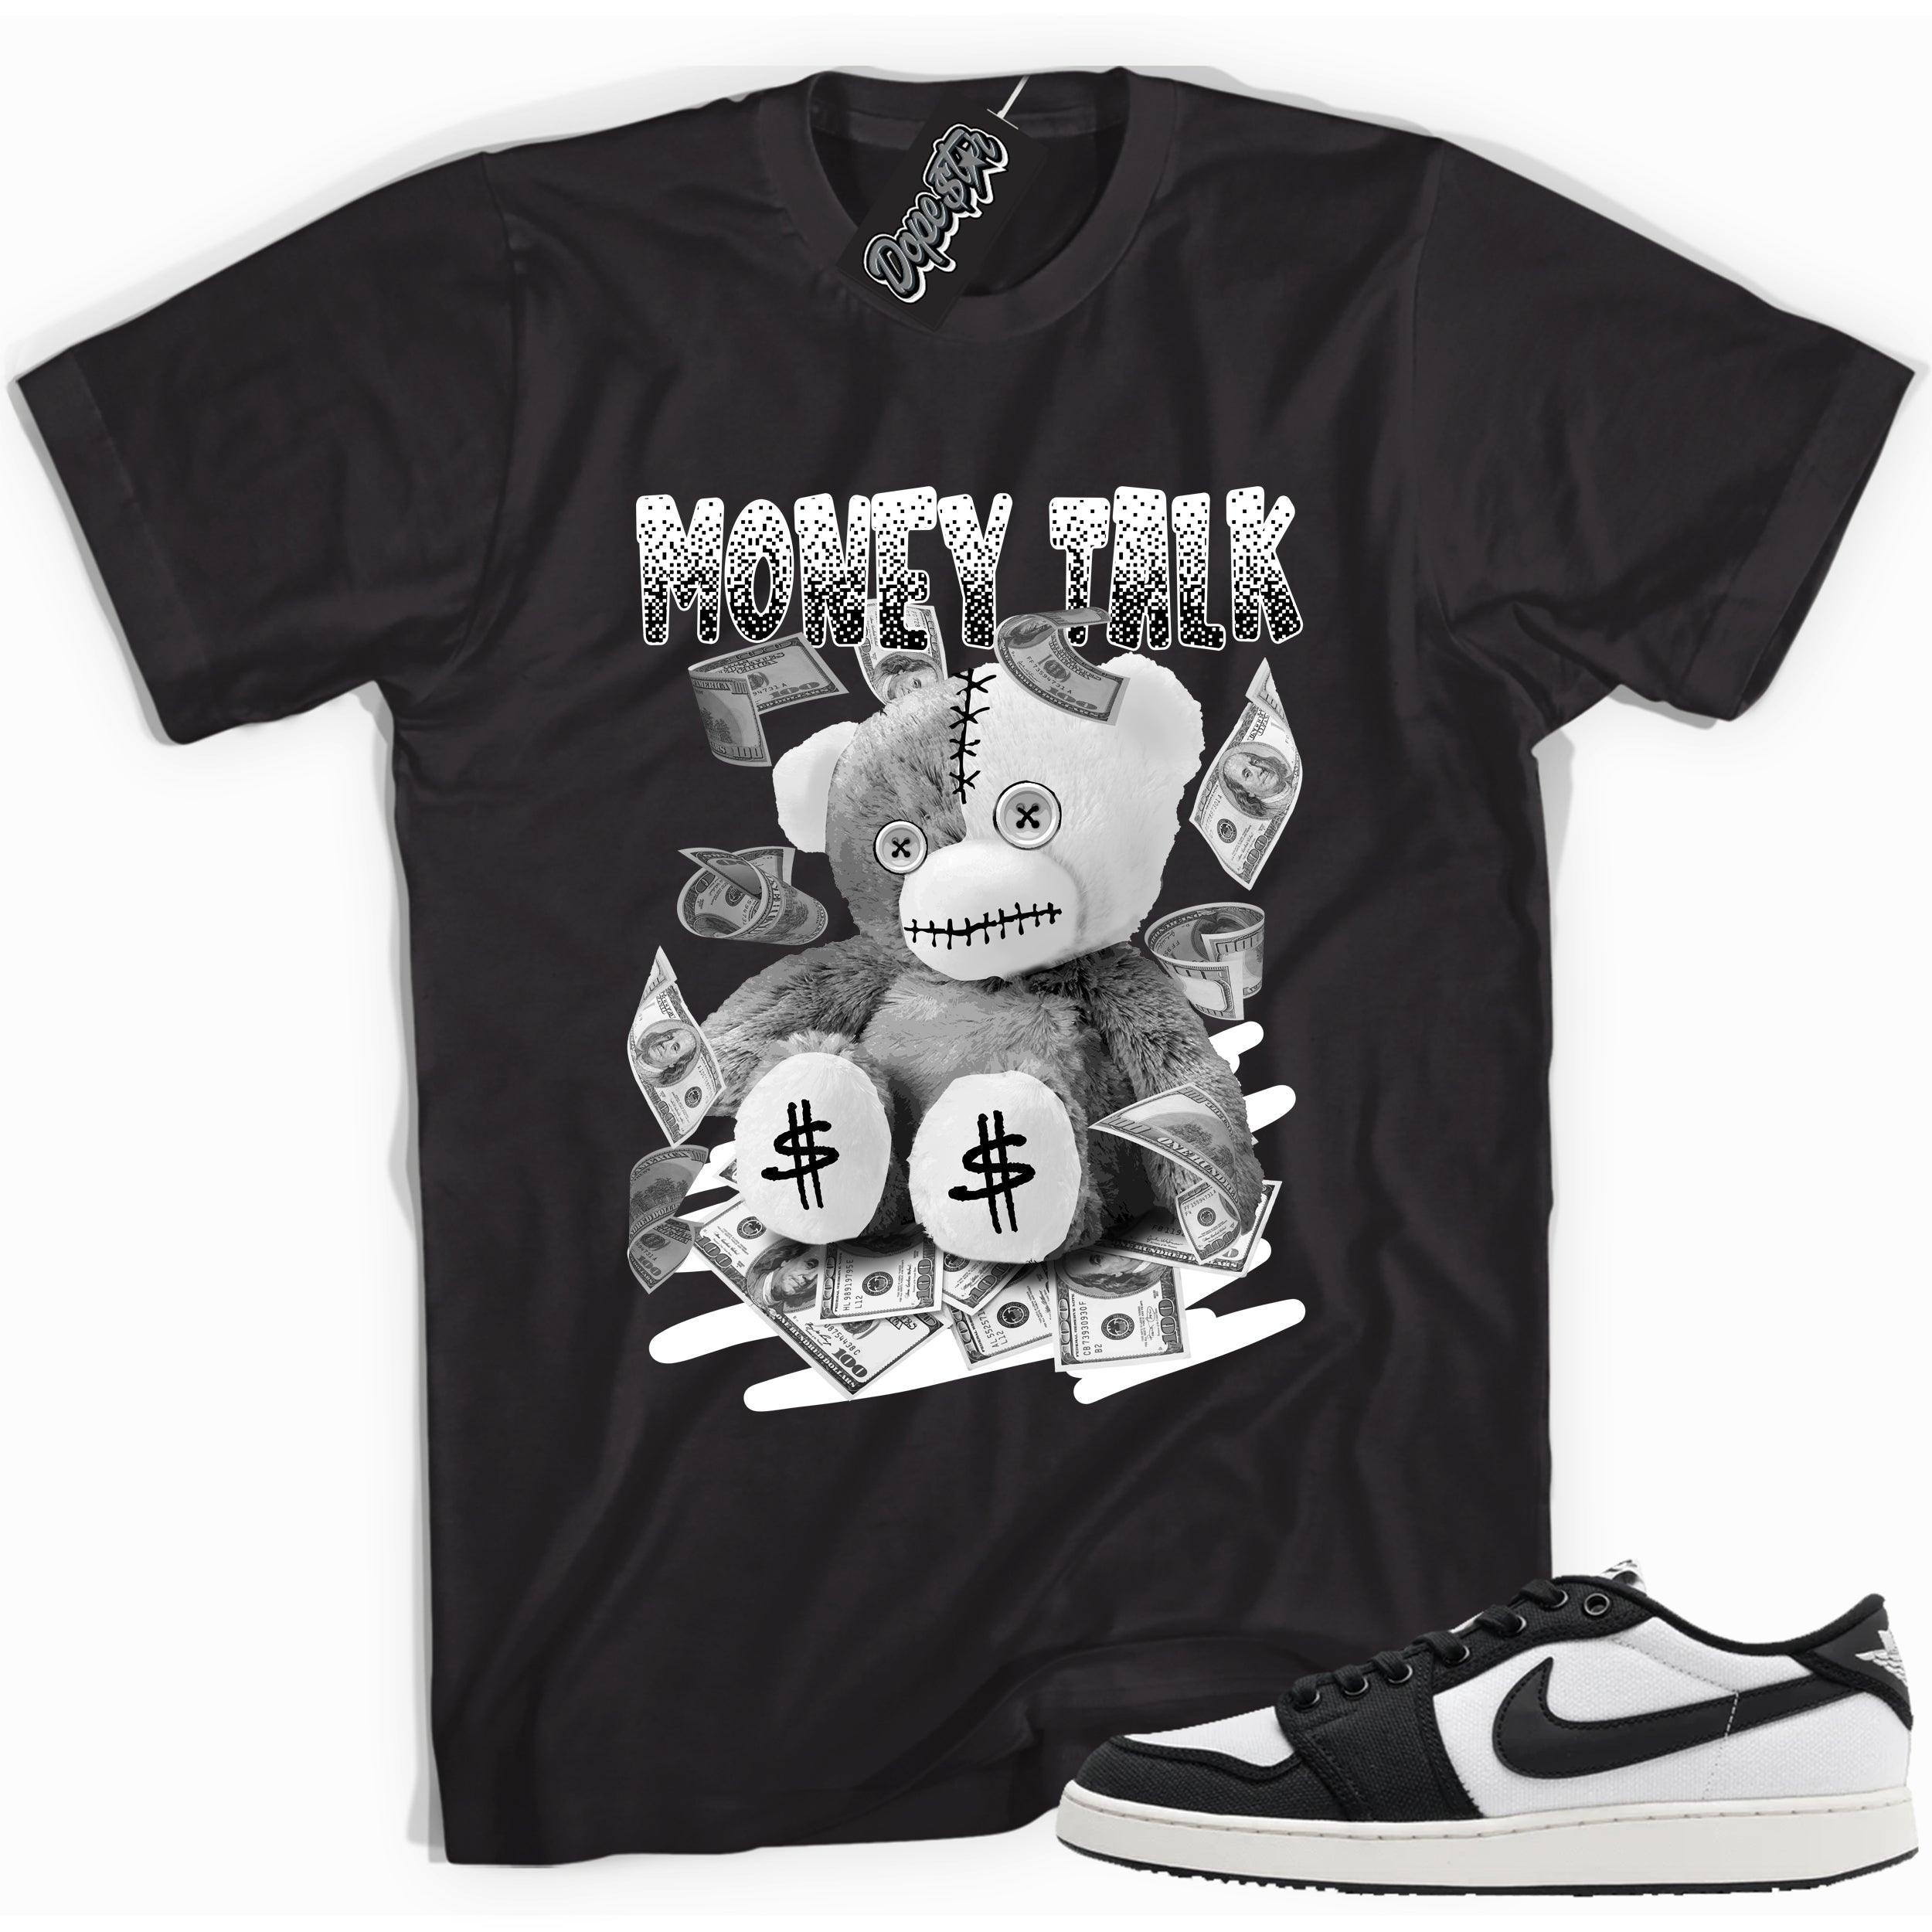 Cool black graphic tee with 'money talk bear' print, that perfectly matches Air Jordan 1 Retro Ajko Low Black & White sneakers.